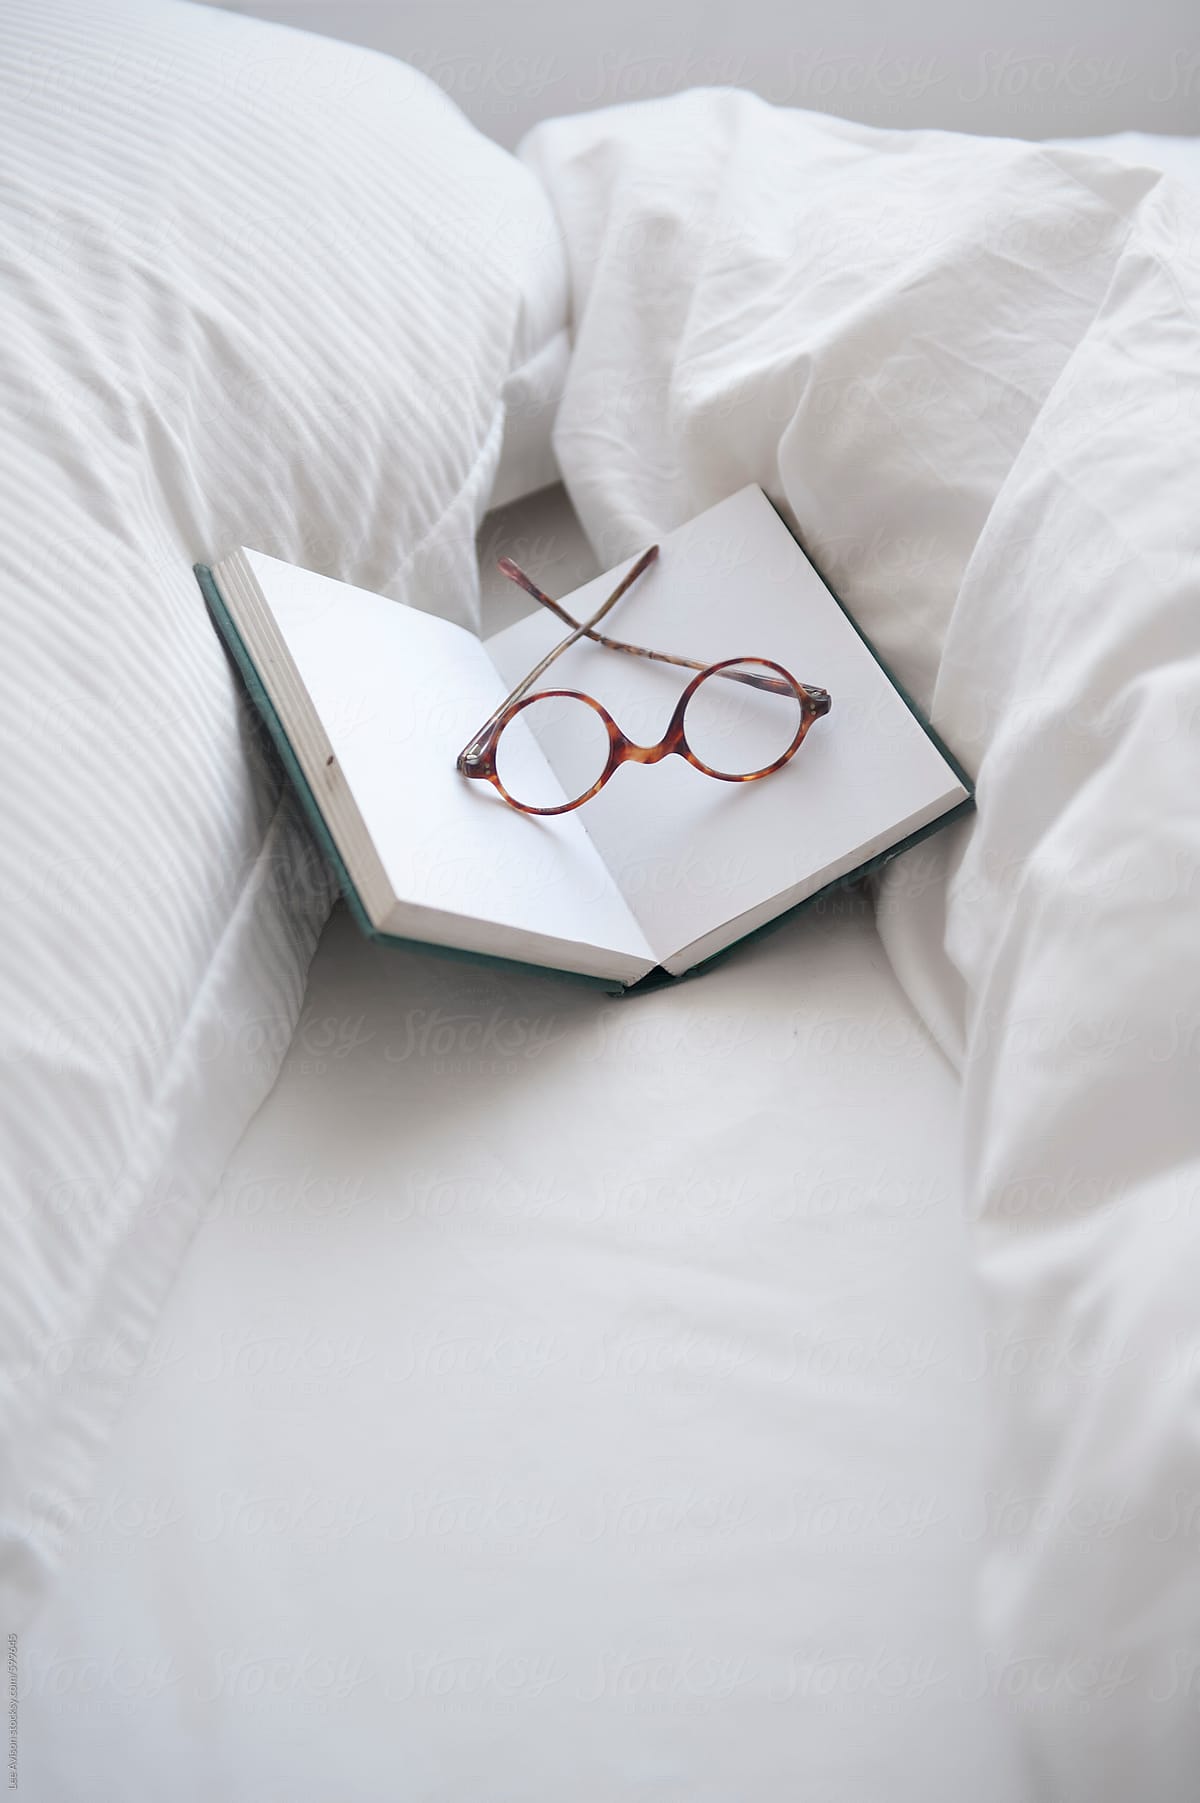 vintage spectacles on an open book